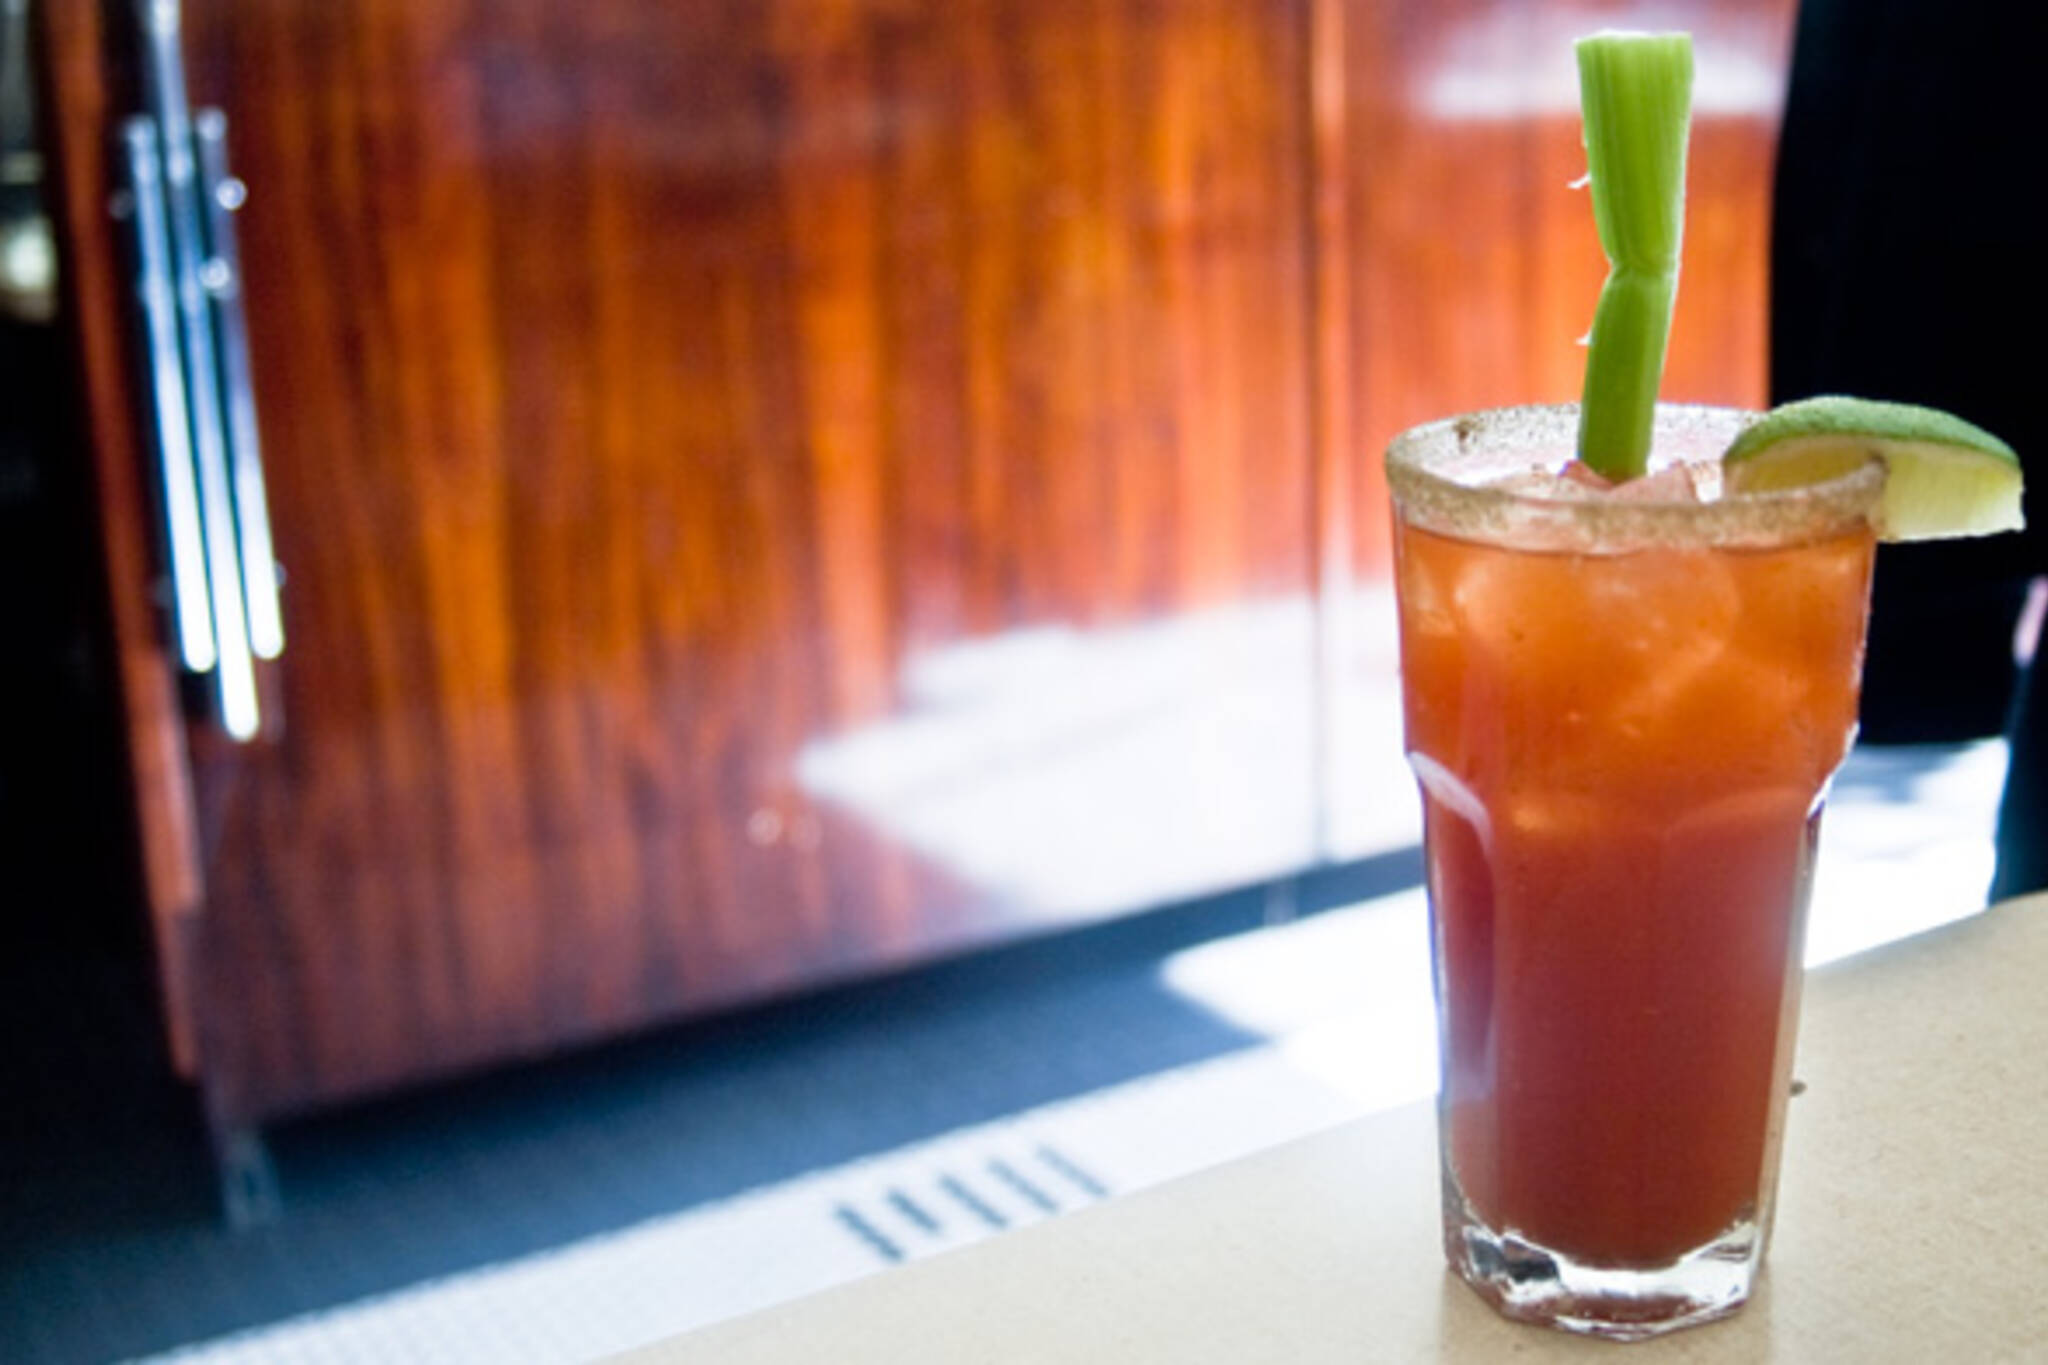 The Lakeview Caesar